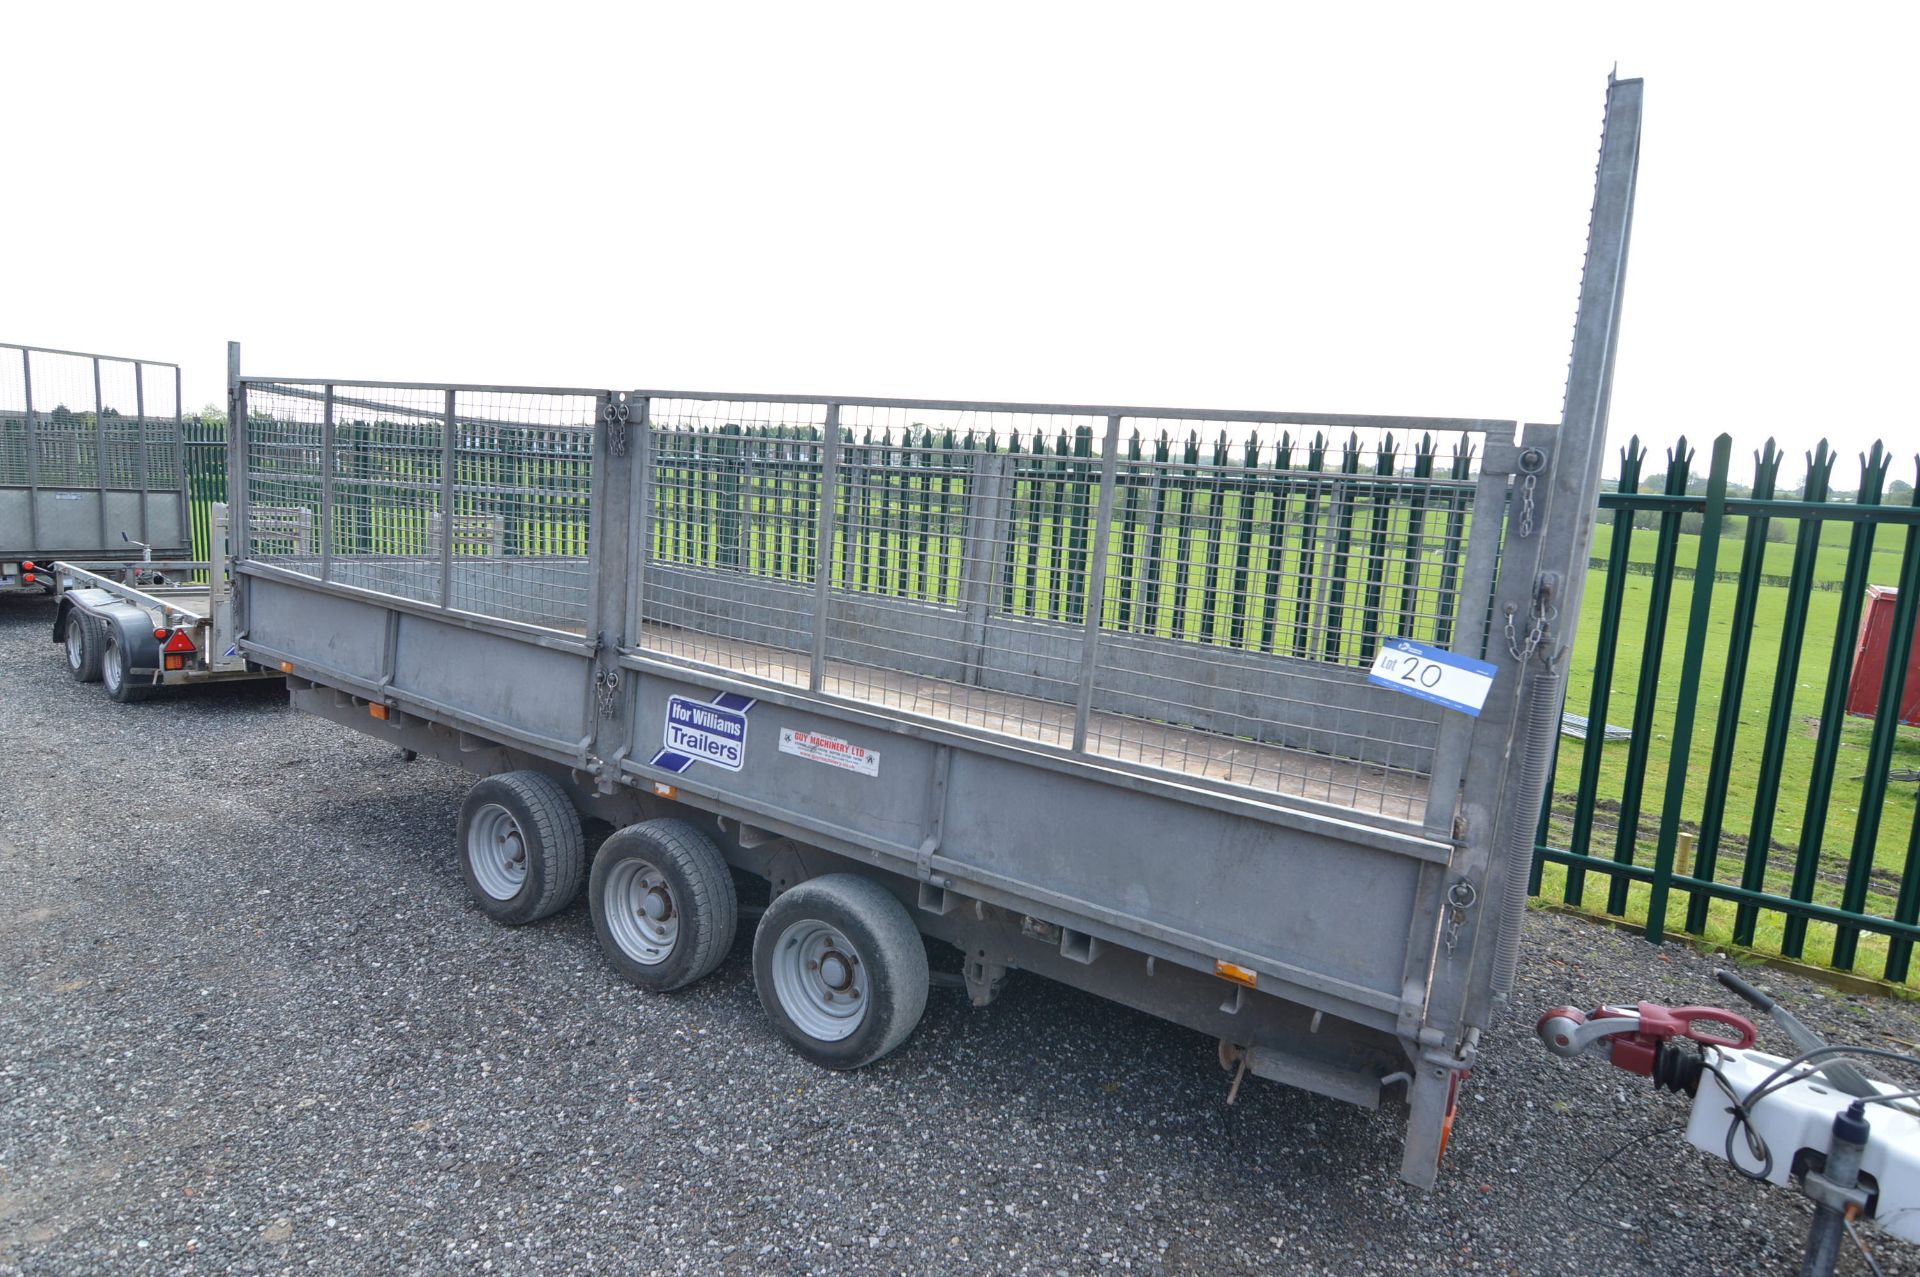 Ifor Williams 3C6LM167G3 TRI-AXLE TRAILER, serial no. SCKT0000E5103793, 3500kg gross weight, 16ft